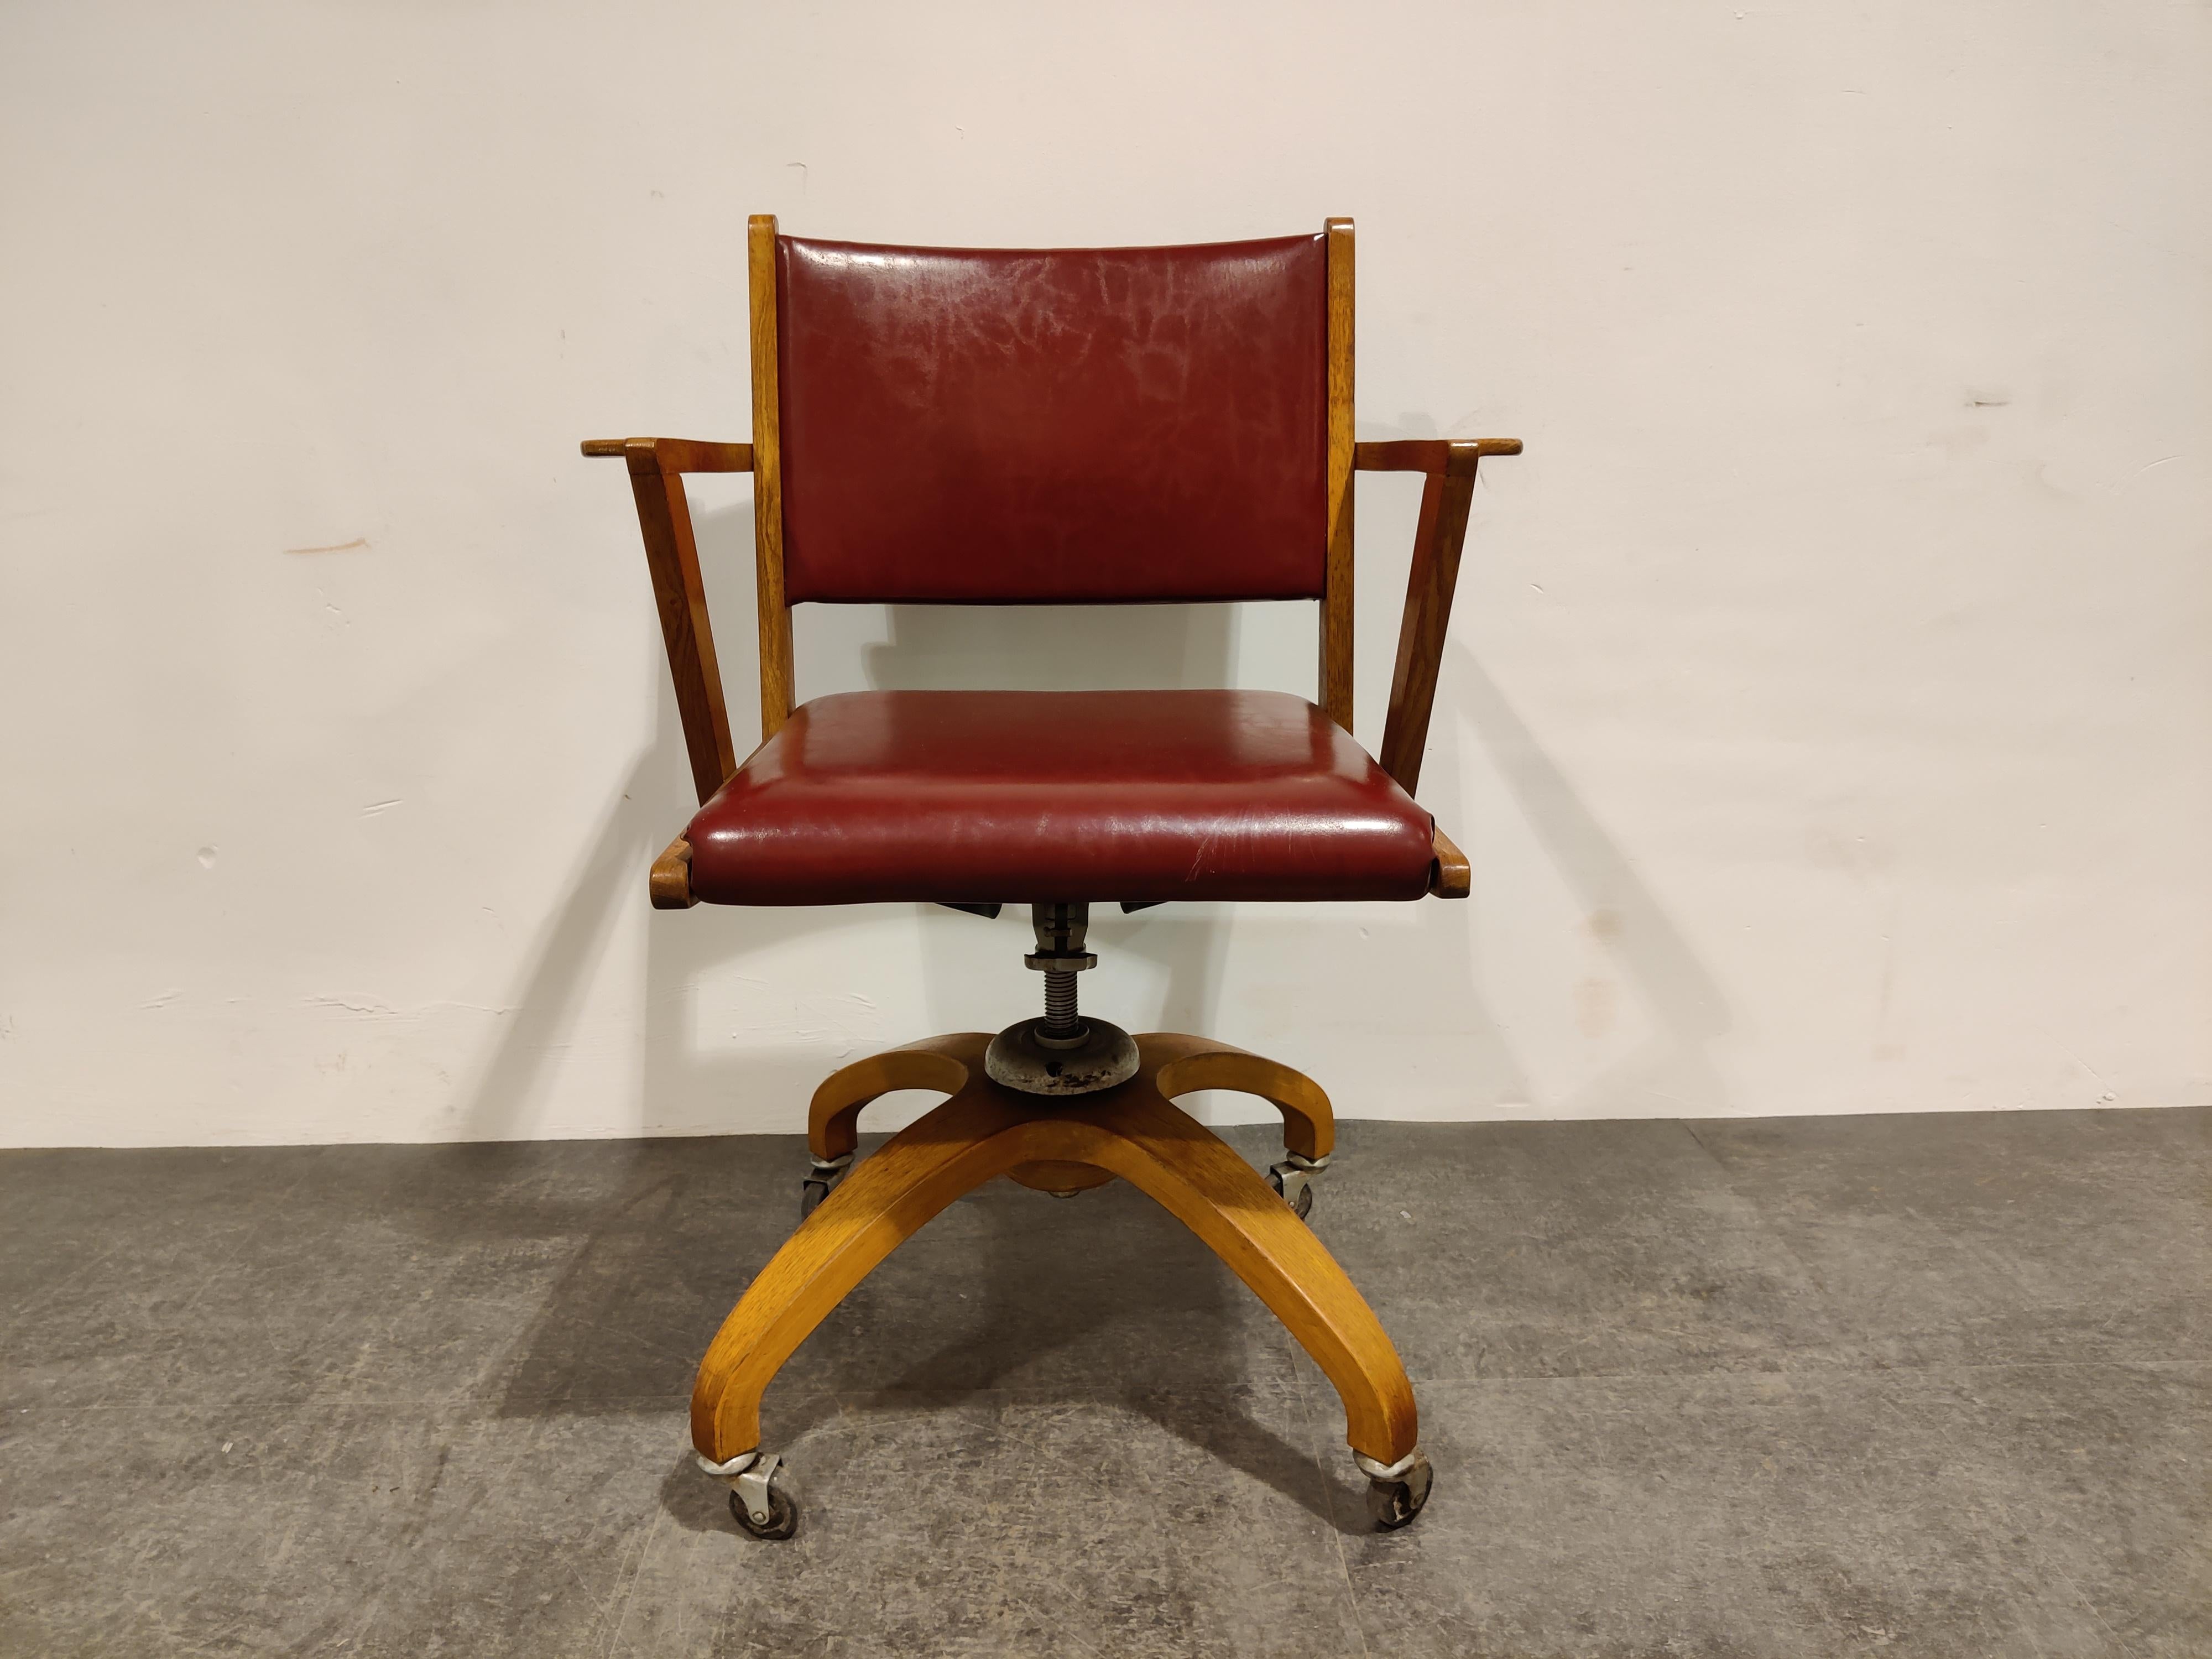 Original mid century desk chair by De Coene, made in Belgium.

Very good qualitative desk chair with a reclining function.

The chair is also adjustable in height by turning it.

Very good condition with dark red leatherette